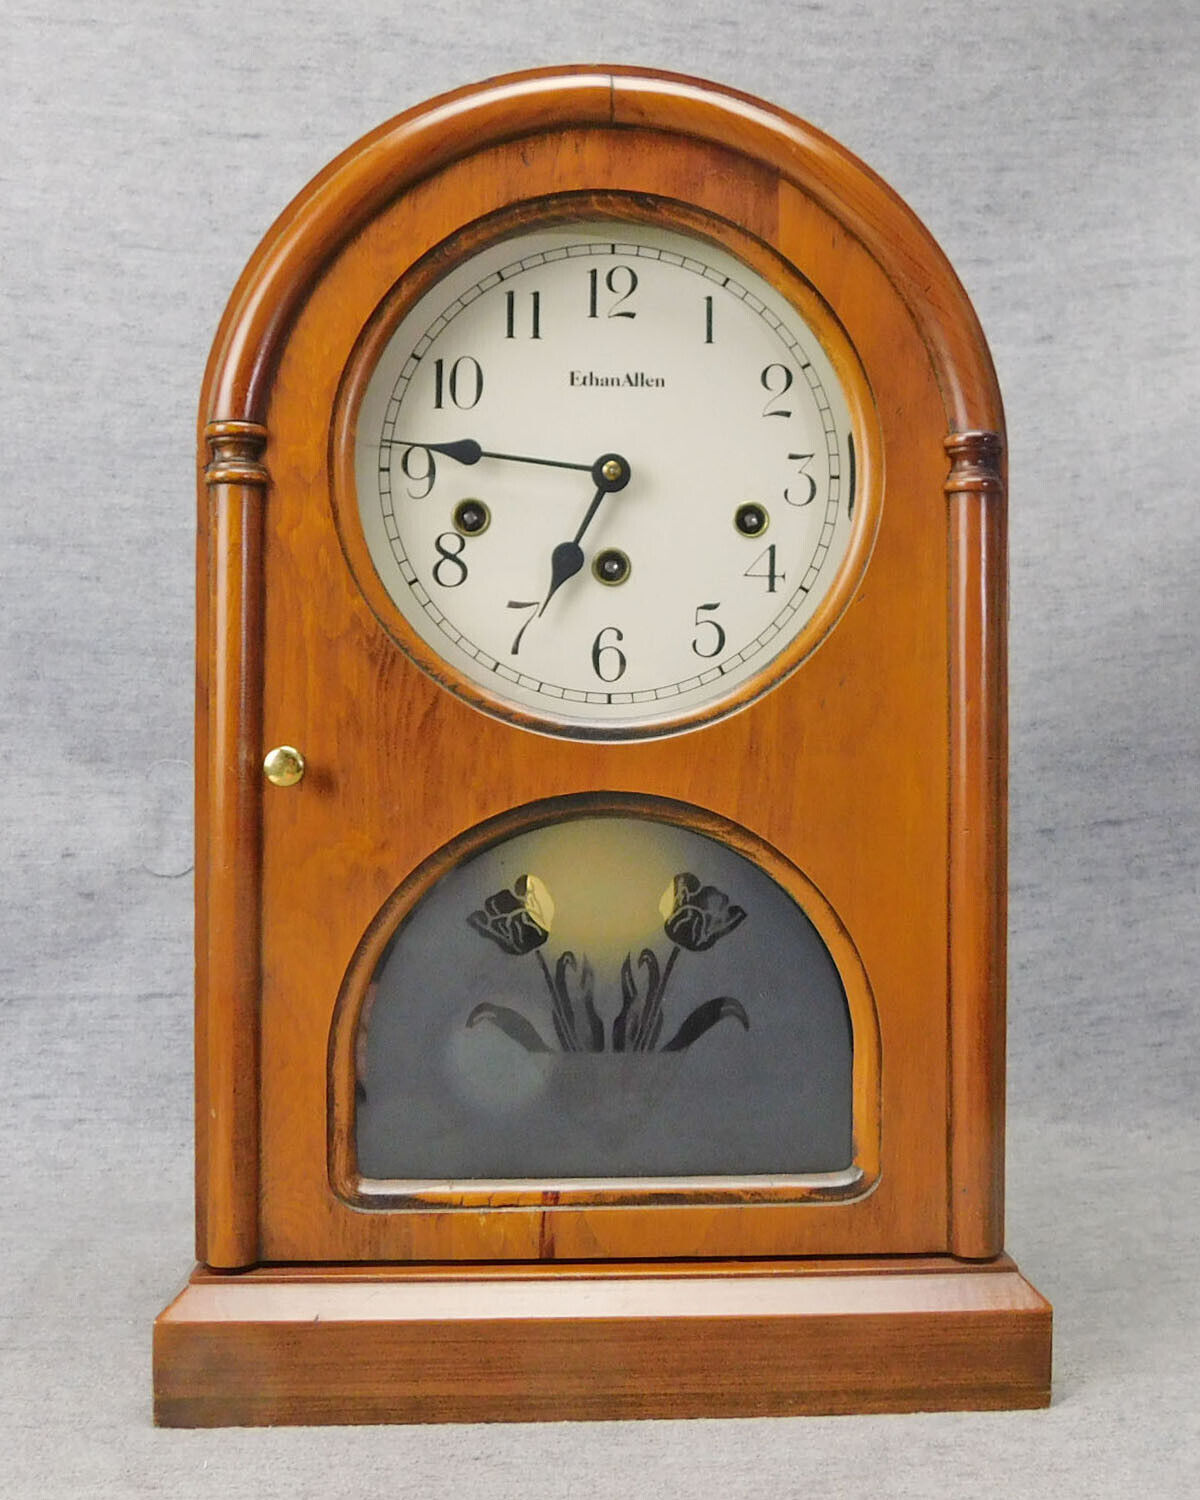 Ethan Allen Franz Hermes #83 Mantle Clock 531-020 Clean Tested Working Used